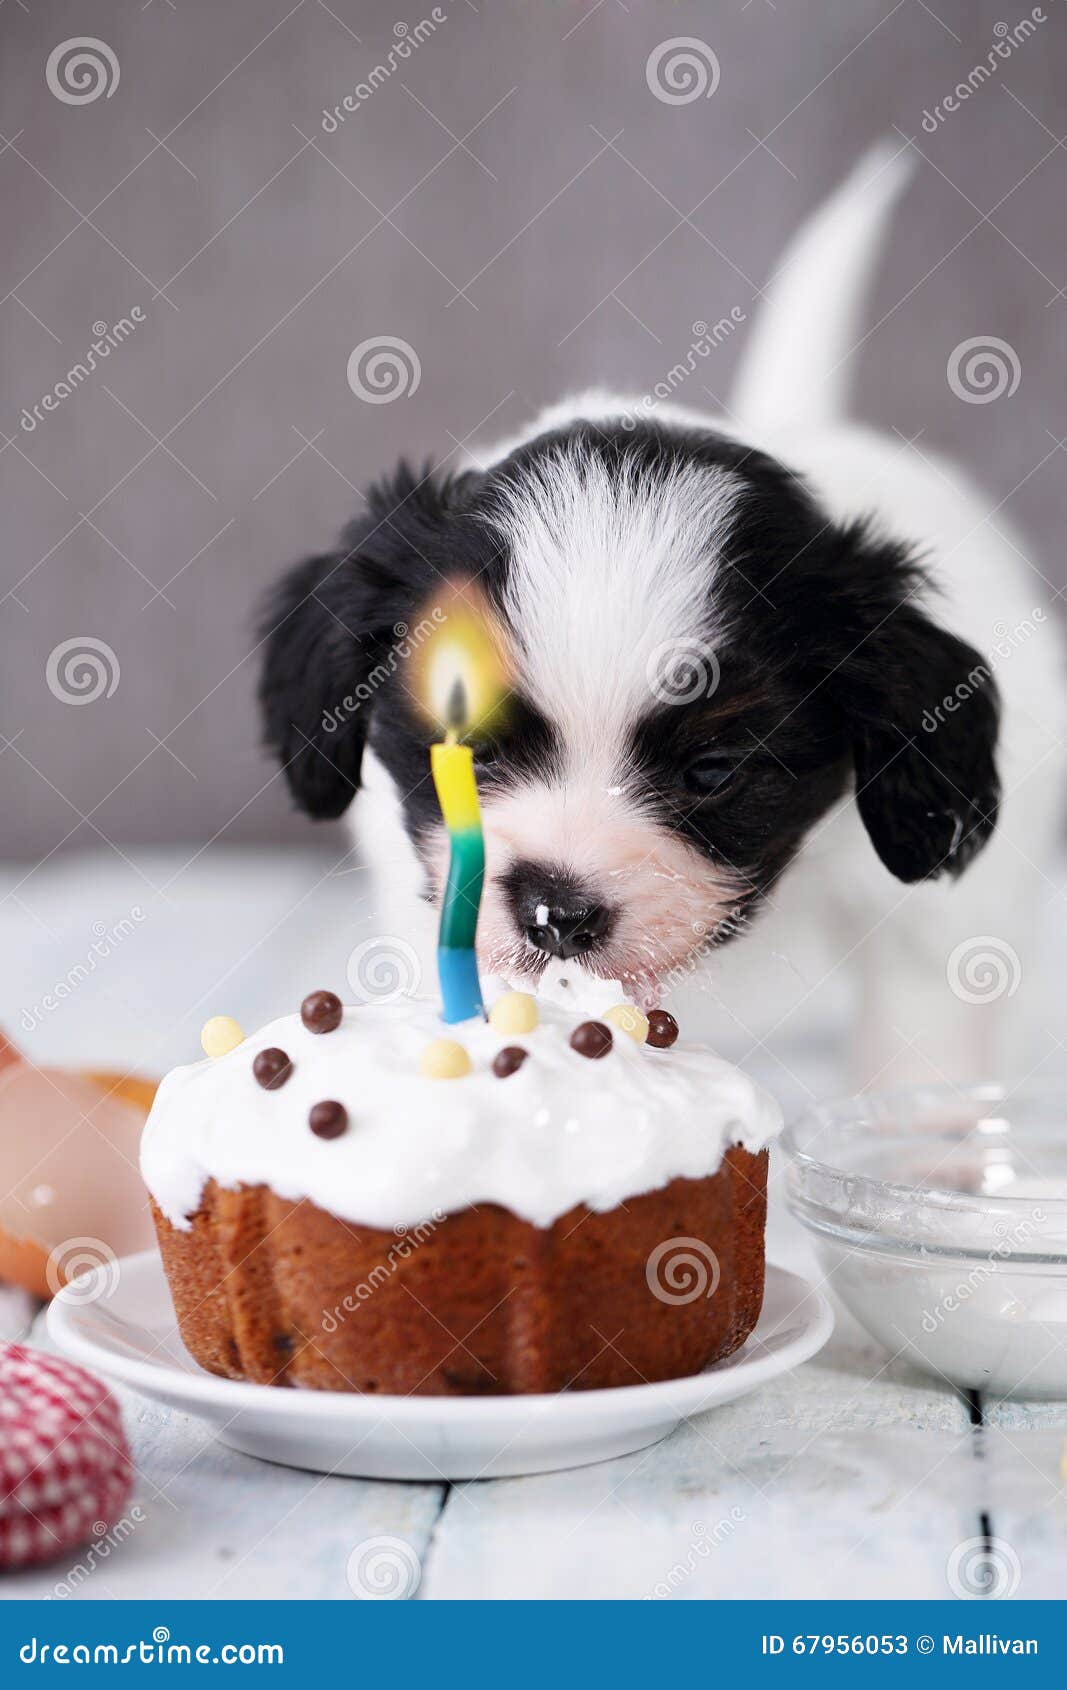 are dogs allowed to eat cake